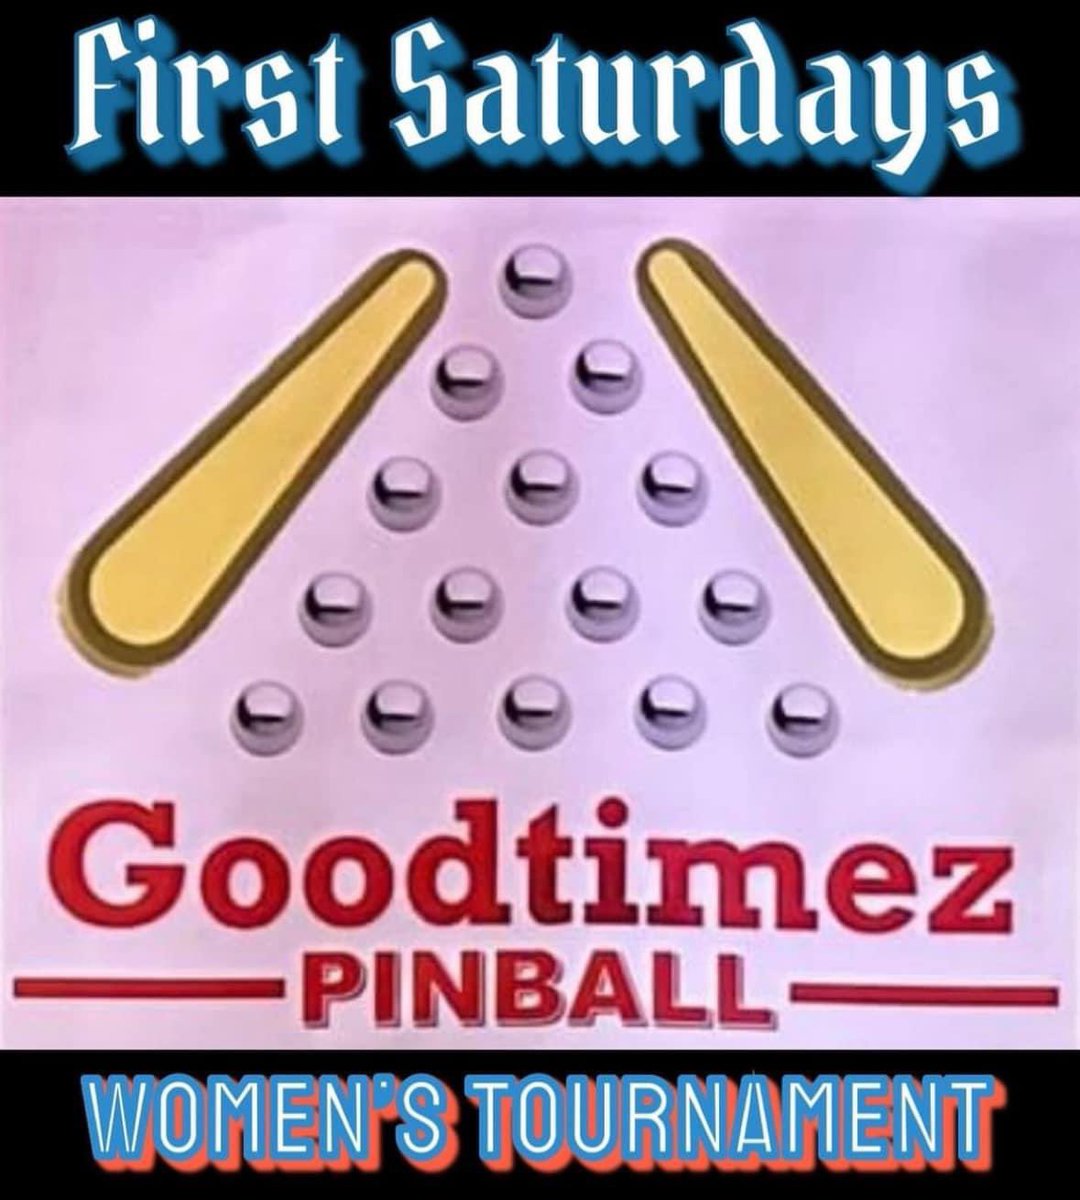 It’s the First Saturdays Women’s Tournament of the year at GoodTimez!!! Today and every First Saturday is the Women’s Only Tournament! Tournament starts at 2pm! Local 1st time players free! #womenstournament #pinball #ifpa #sternarmy #sternpinball #vegas #lasvegas